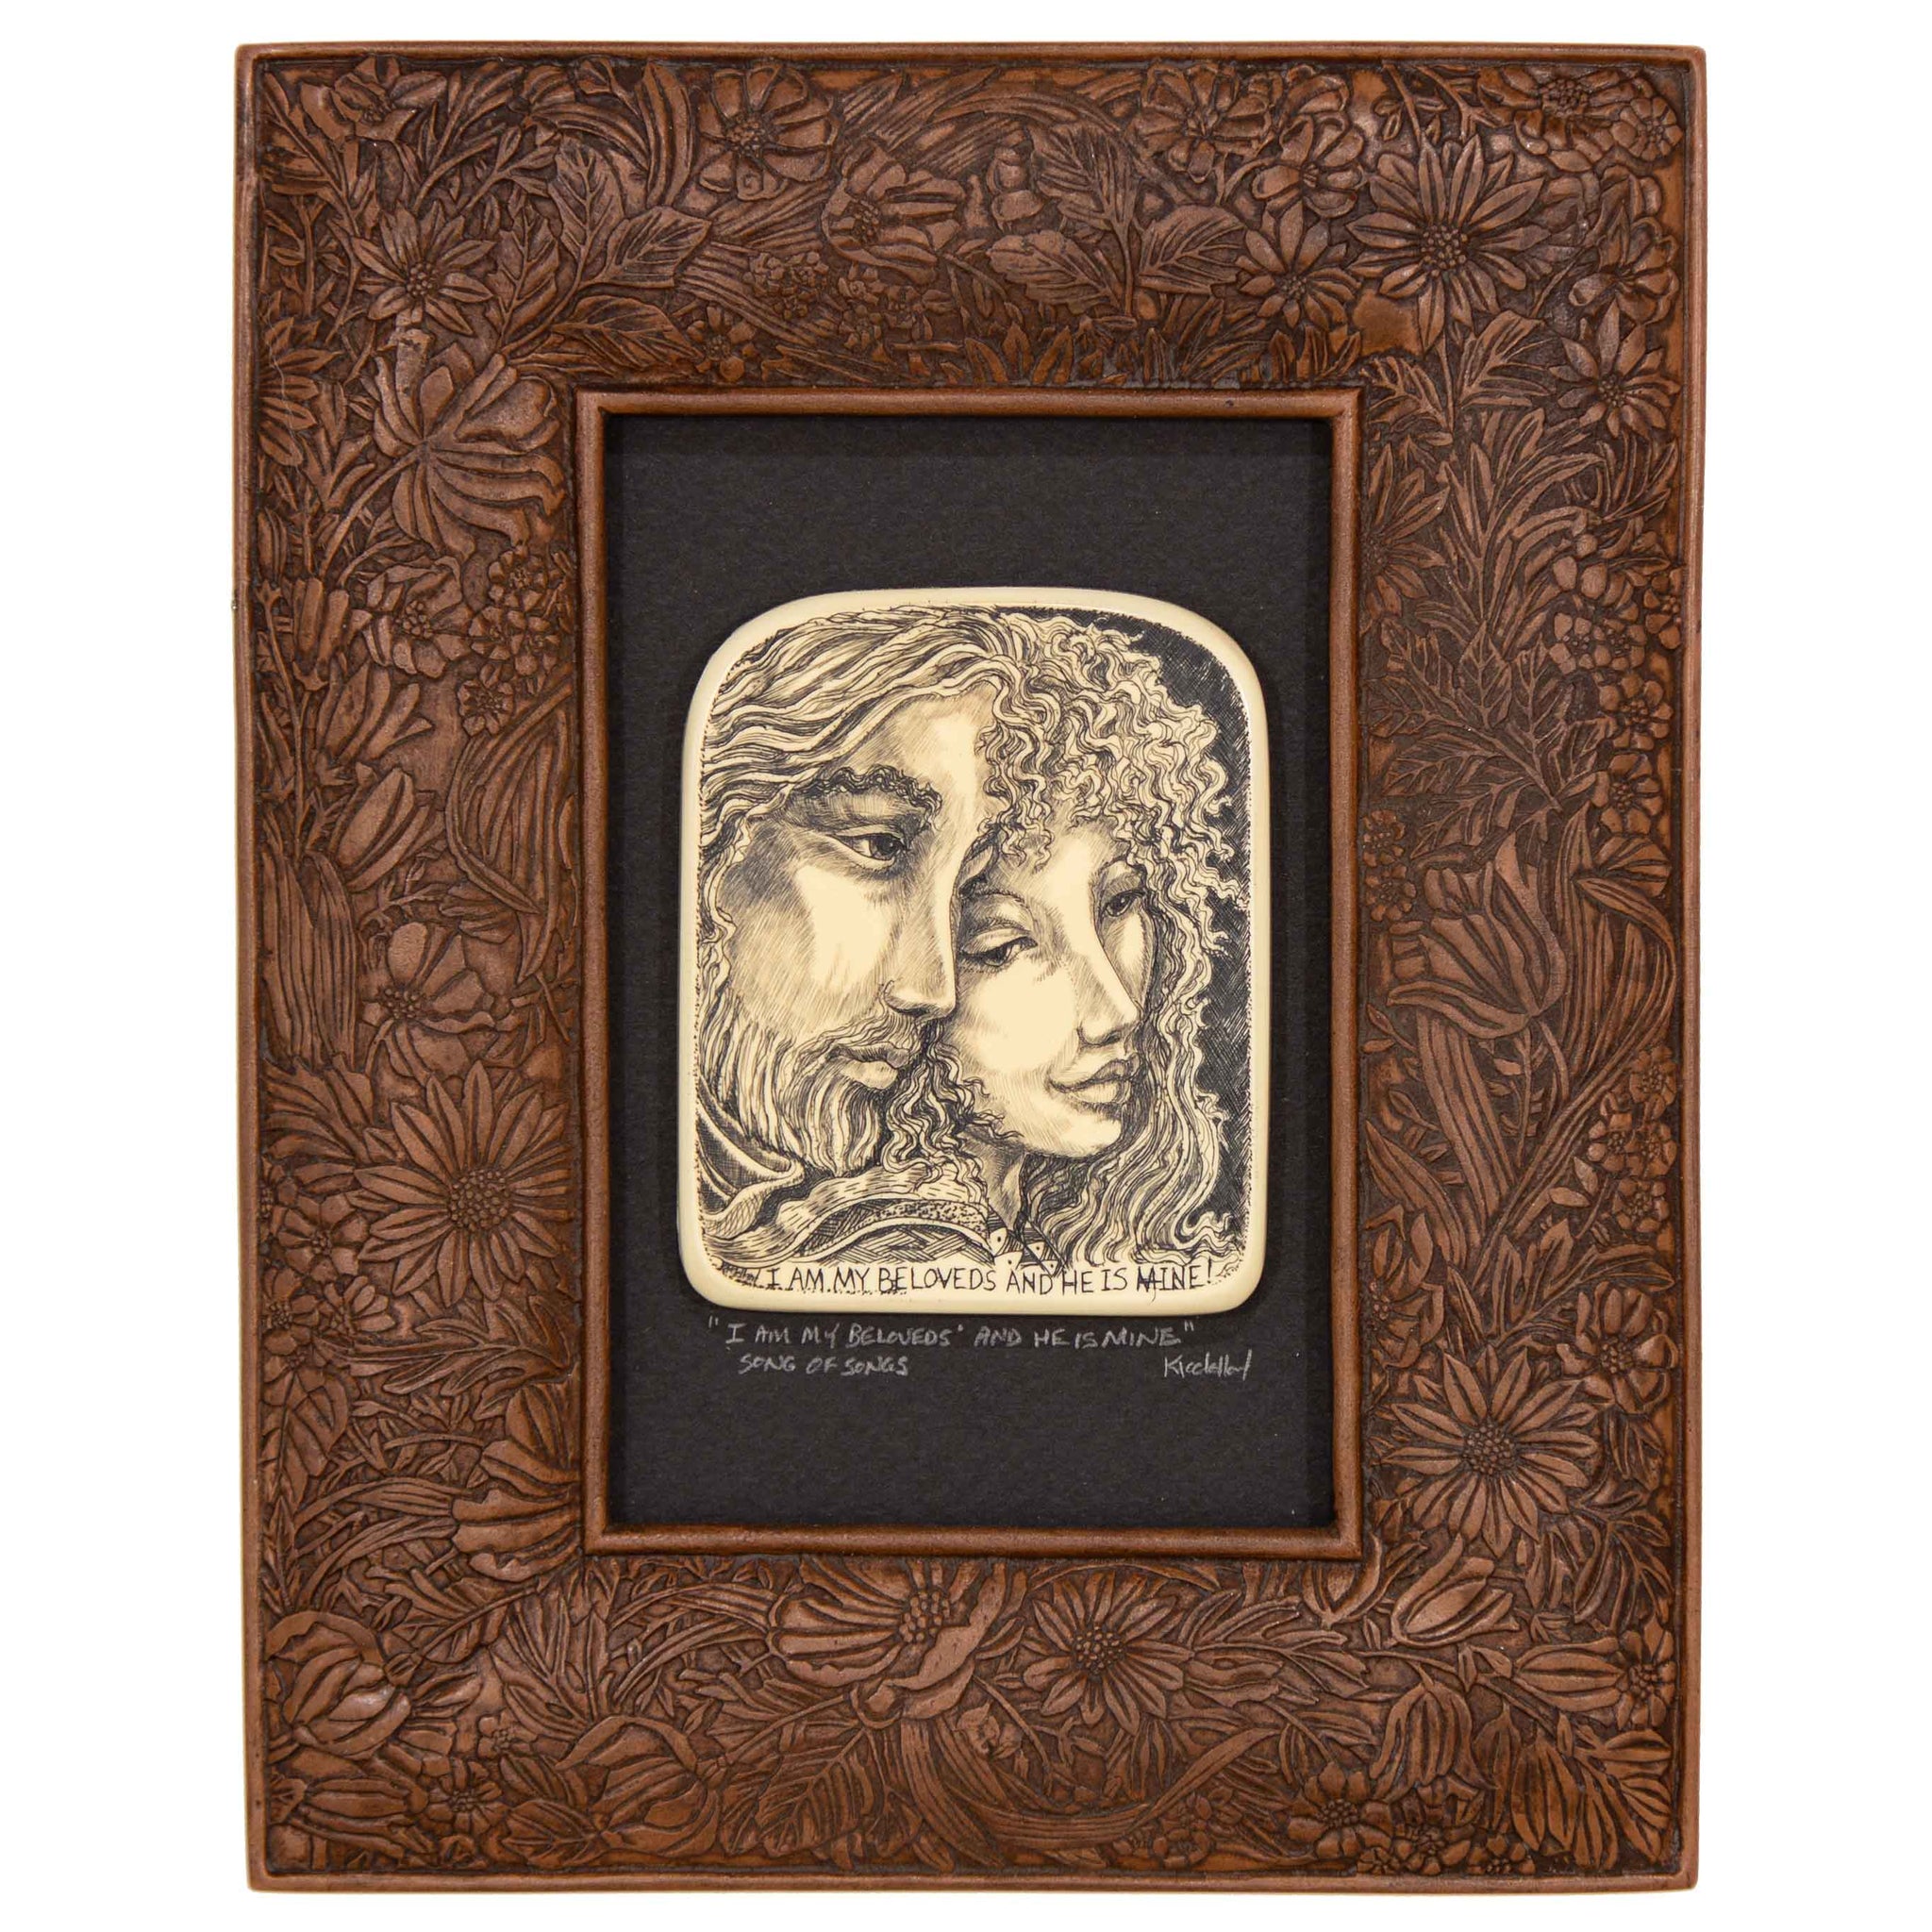 "I Am My Beloved's and He is Mine" Large Chip Carved Frame